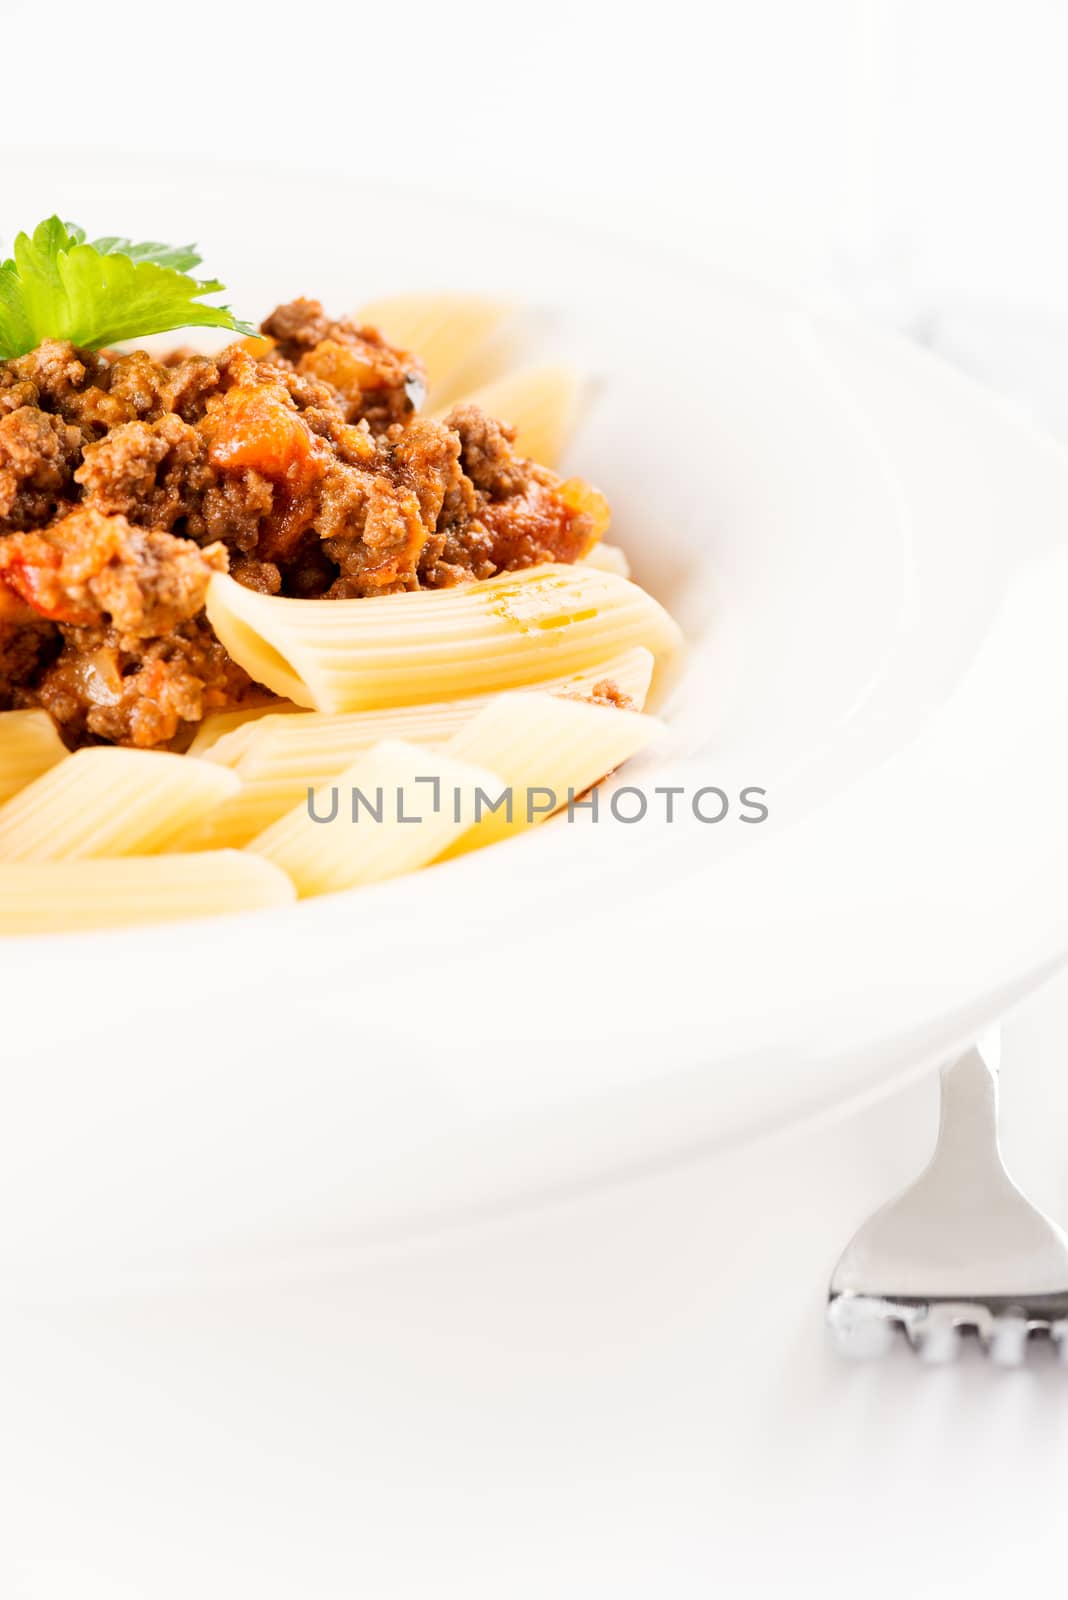 Penne Pasta with Bolognese Sauce vertical macro by Nanisimova